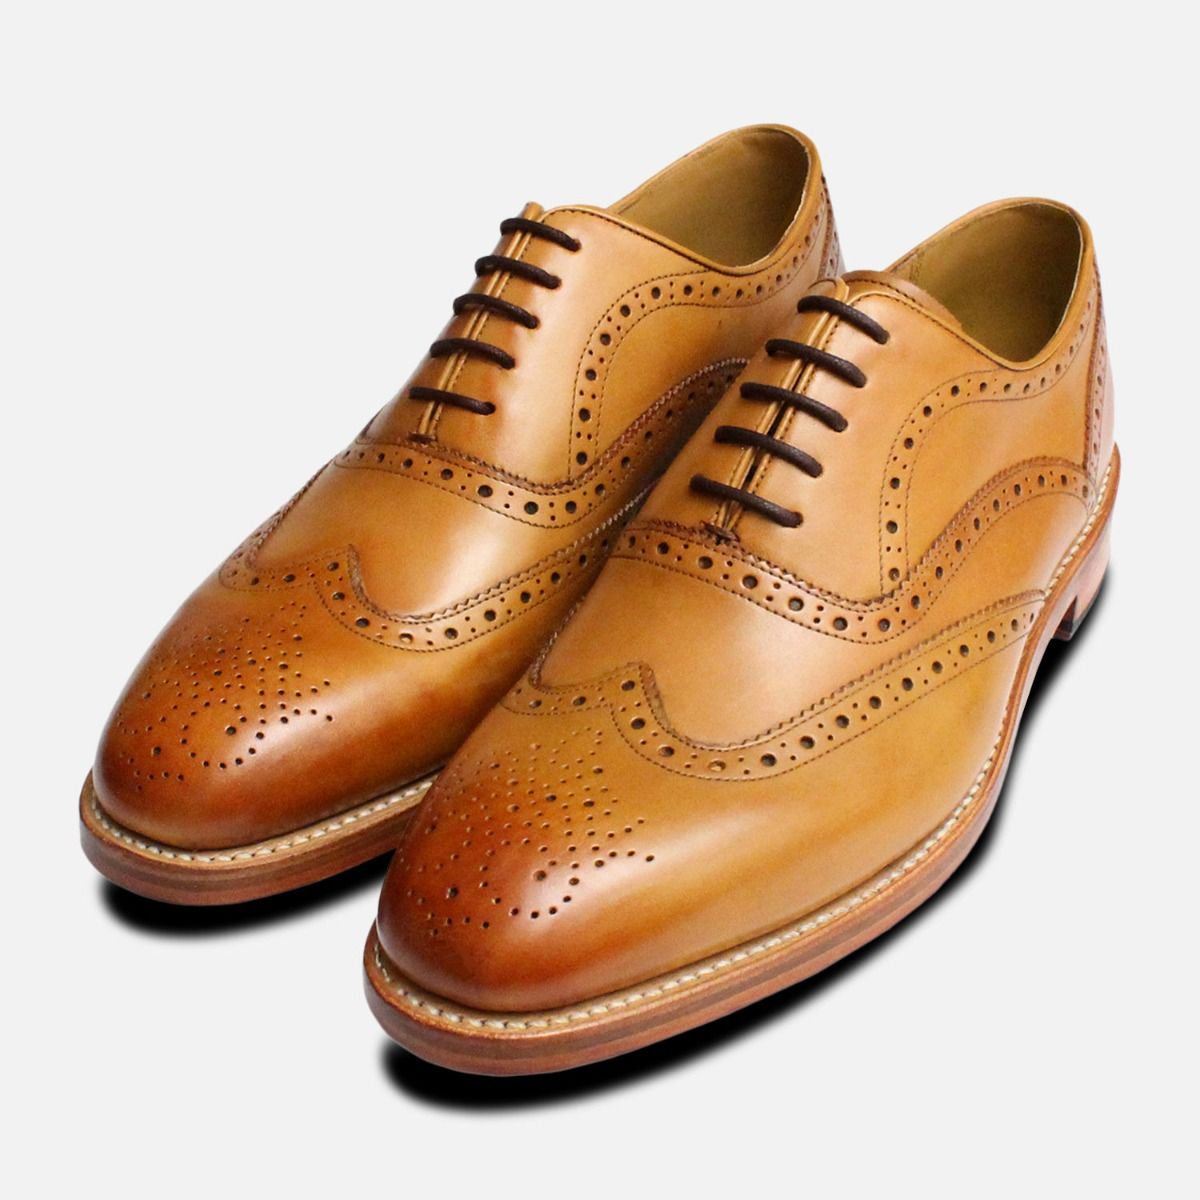 Oliver Sweeney Wingcap Oxford Brogues 